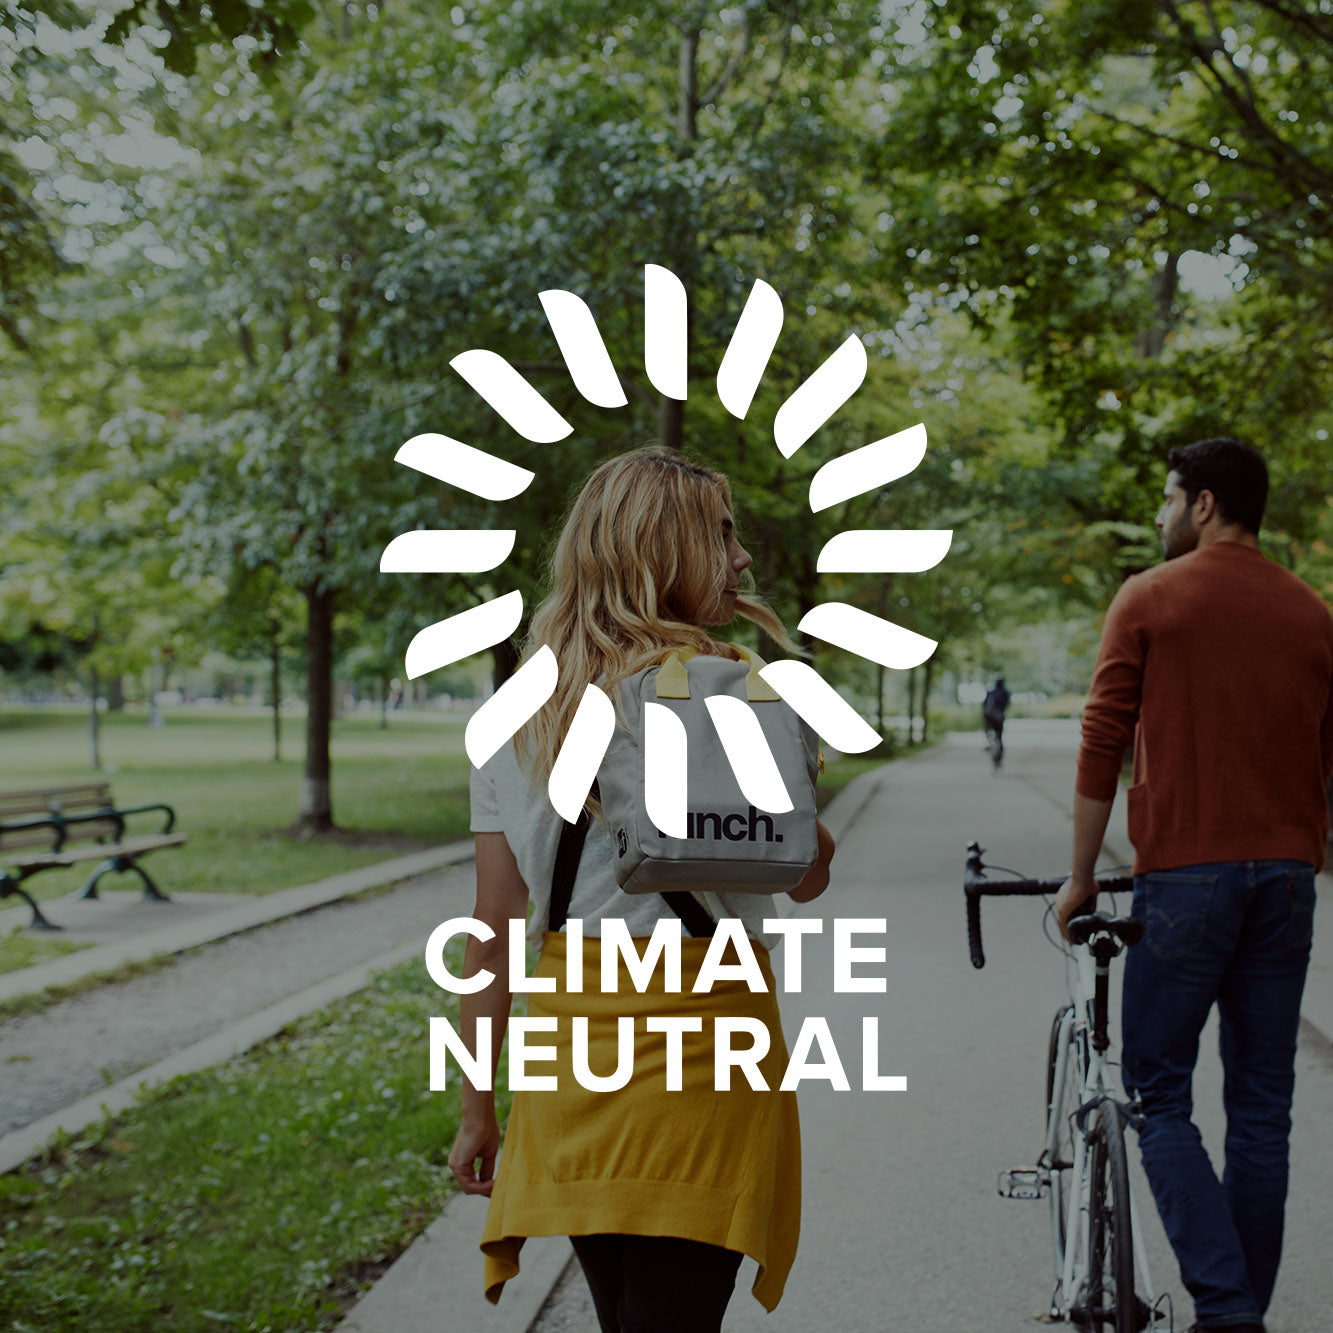 Our commitment to Becoming Climate Neutral